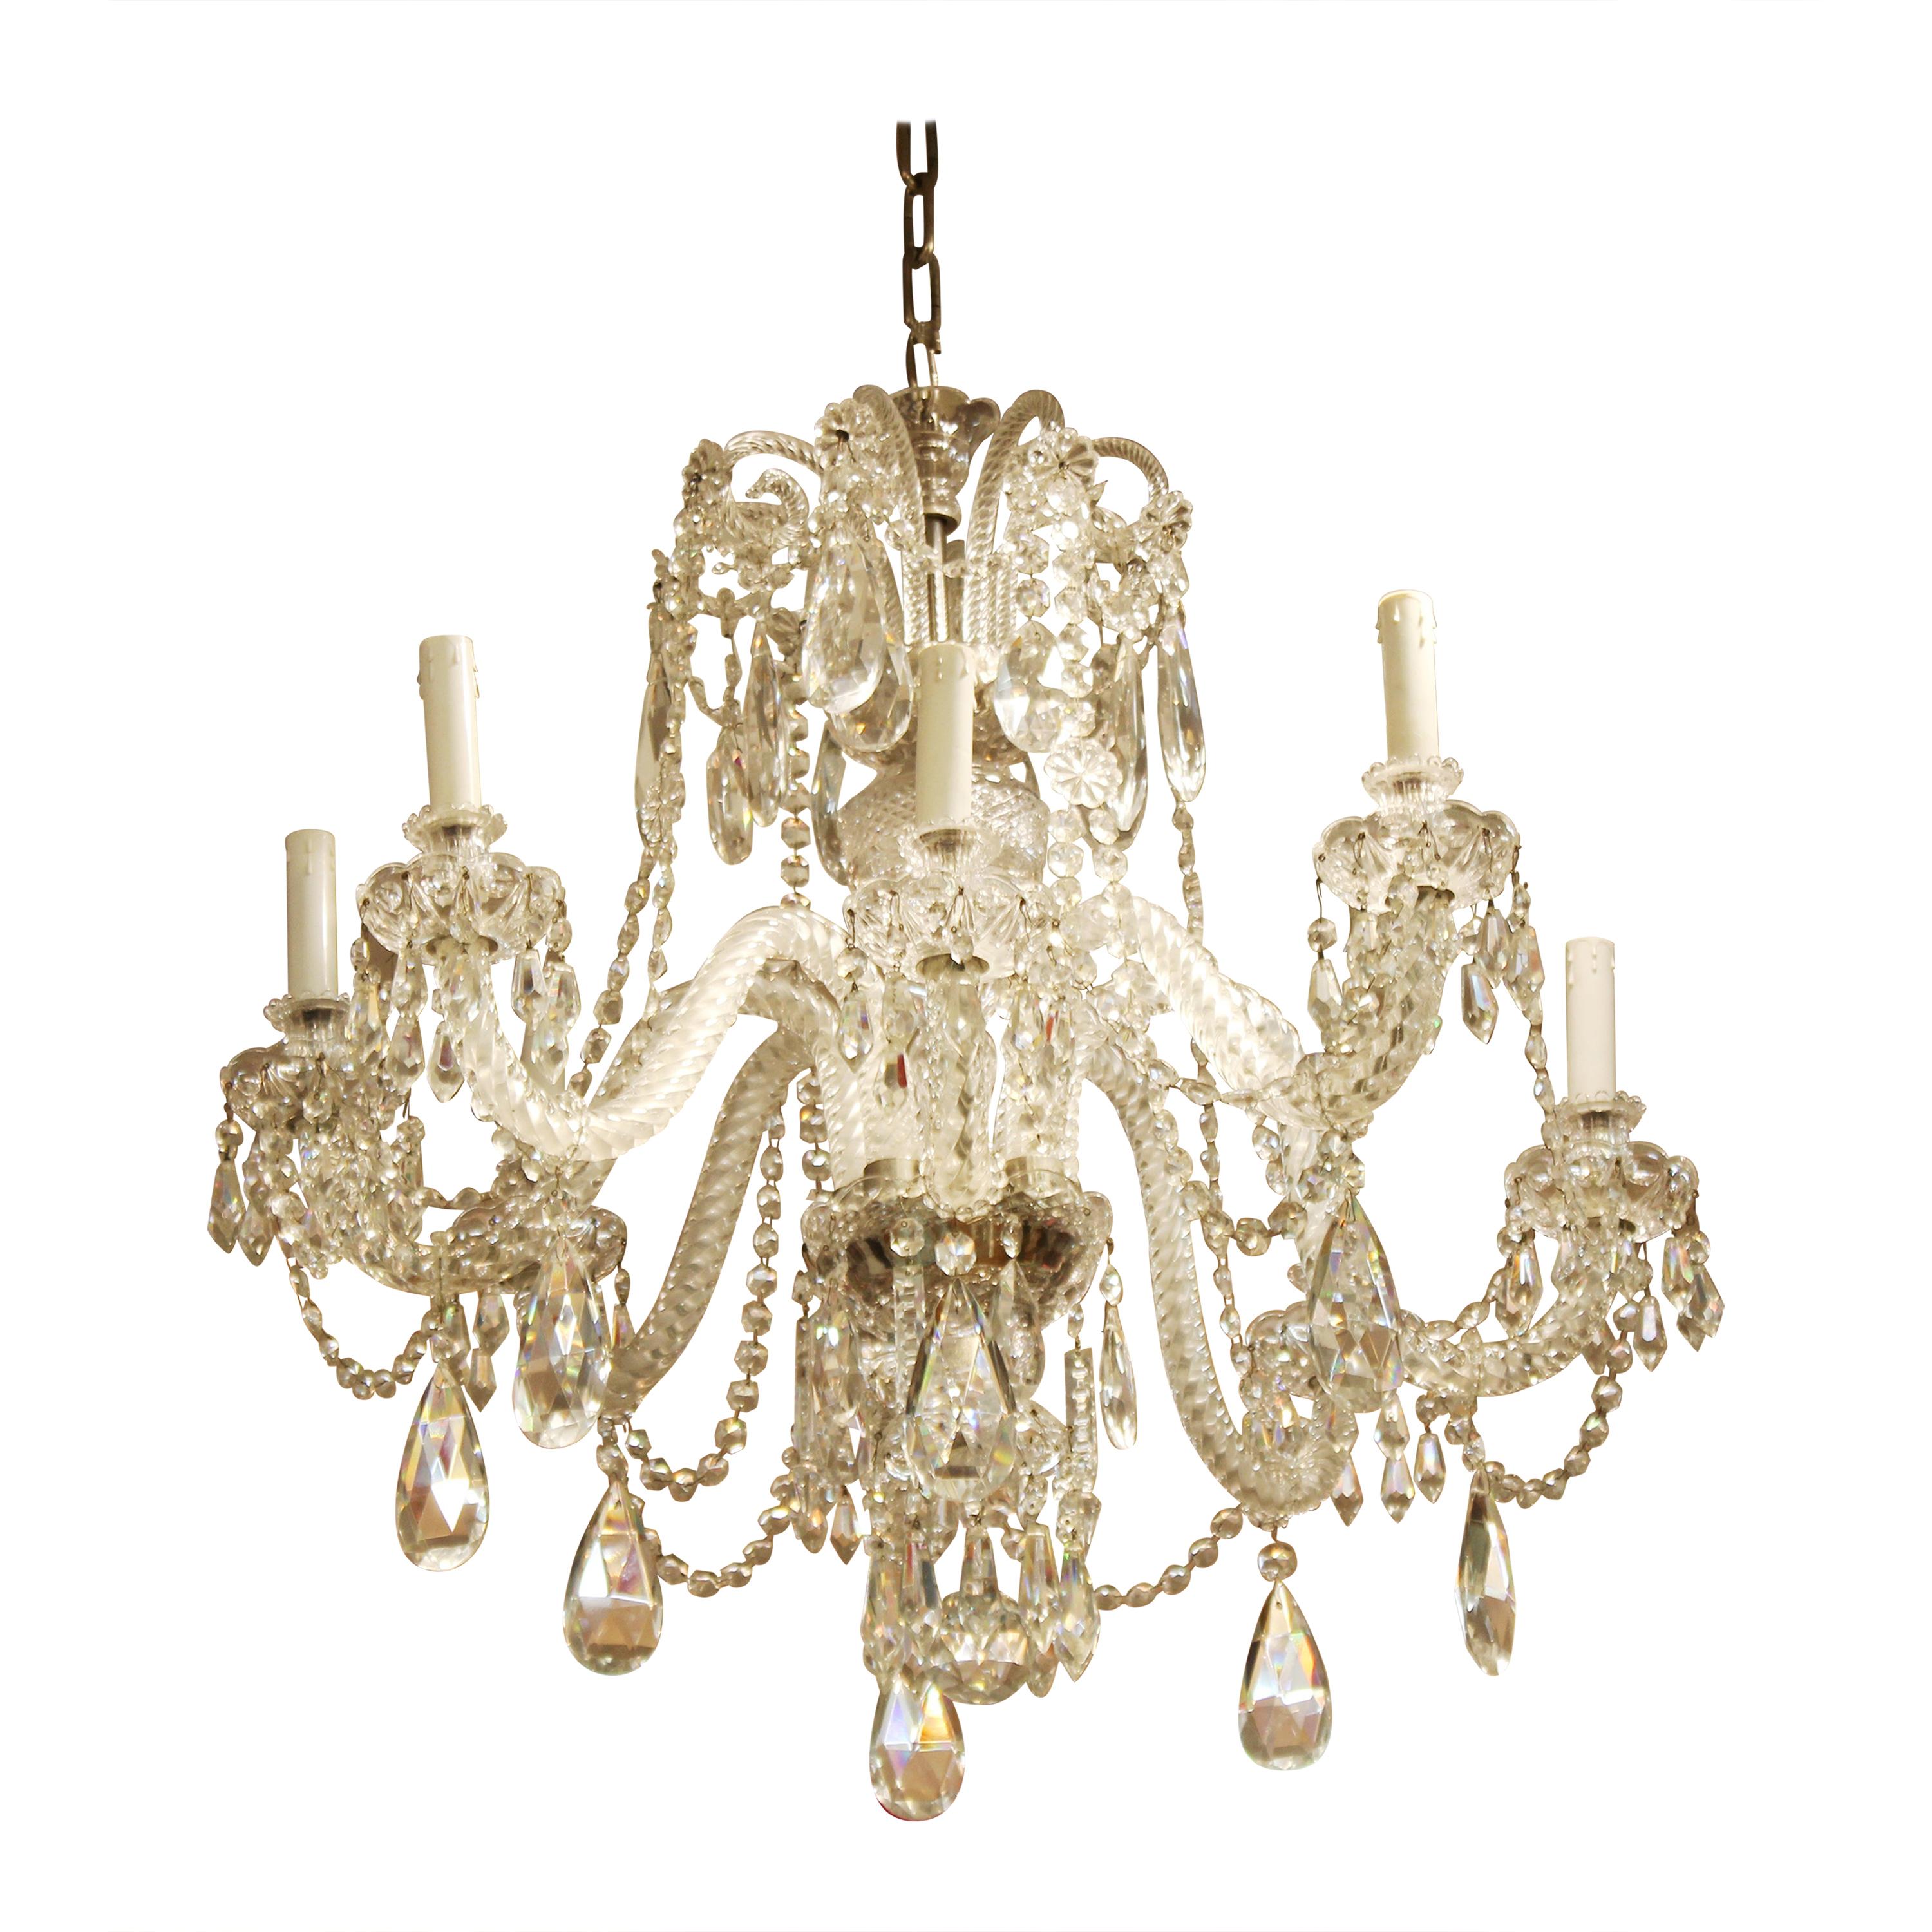 Martinez y Ortz Neoclassical Style Crystal Chandelier For Sale